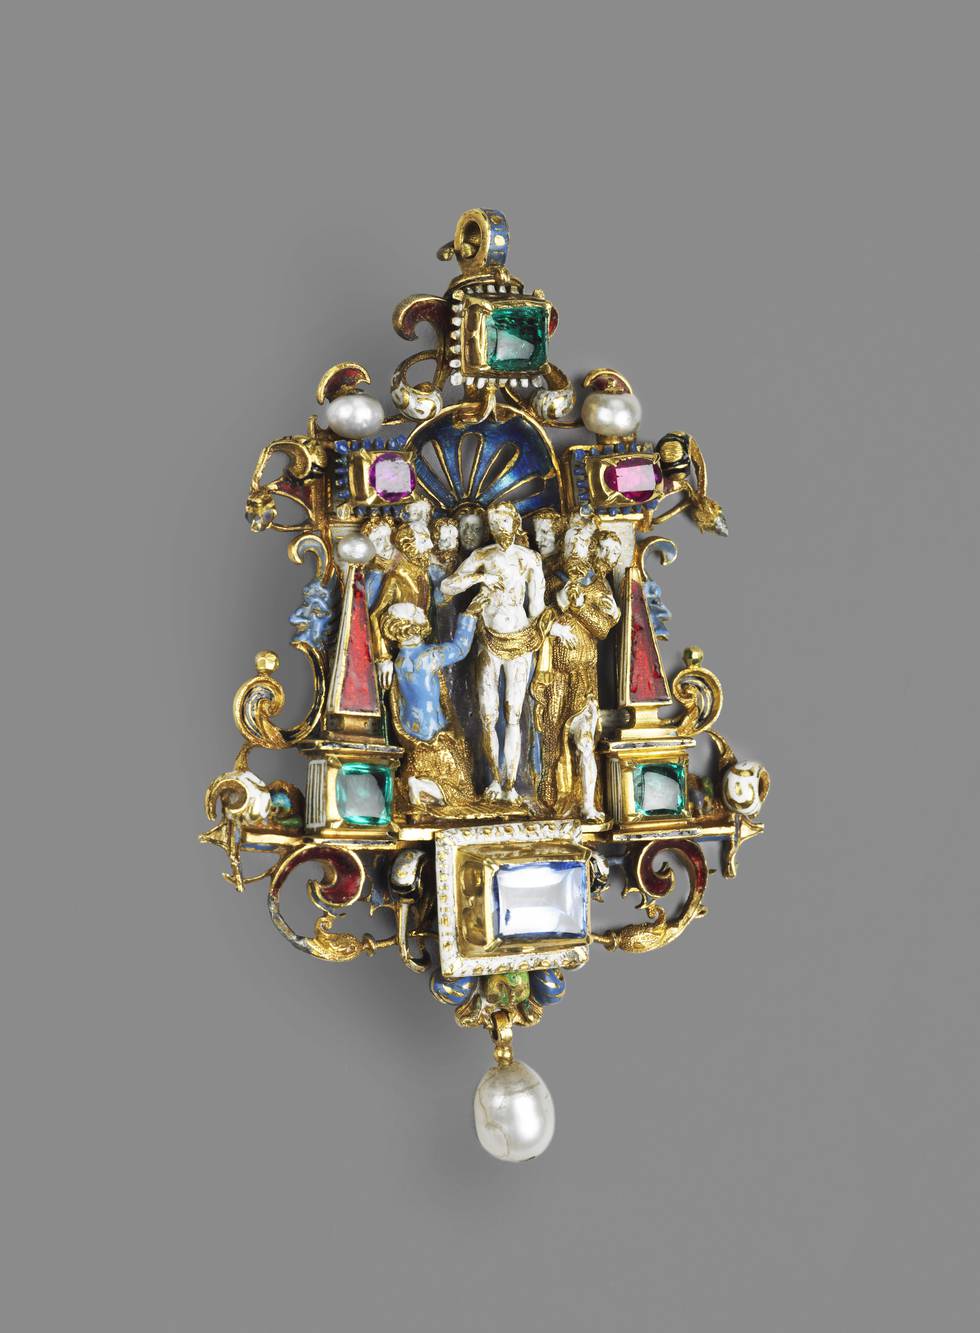 Bejewelled gold pendant, central a man surrounded by a group